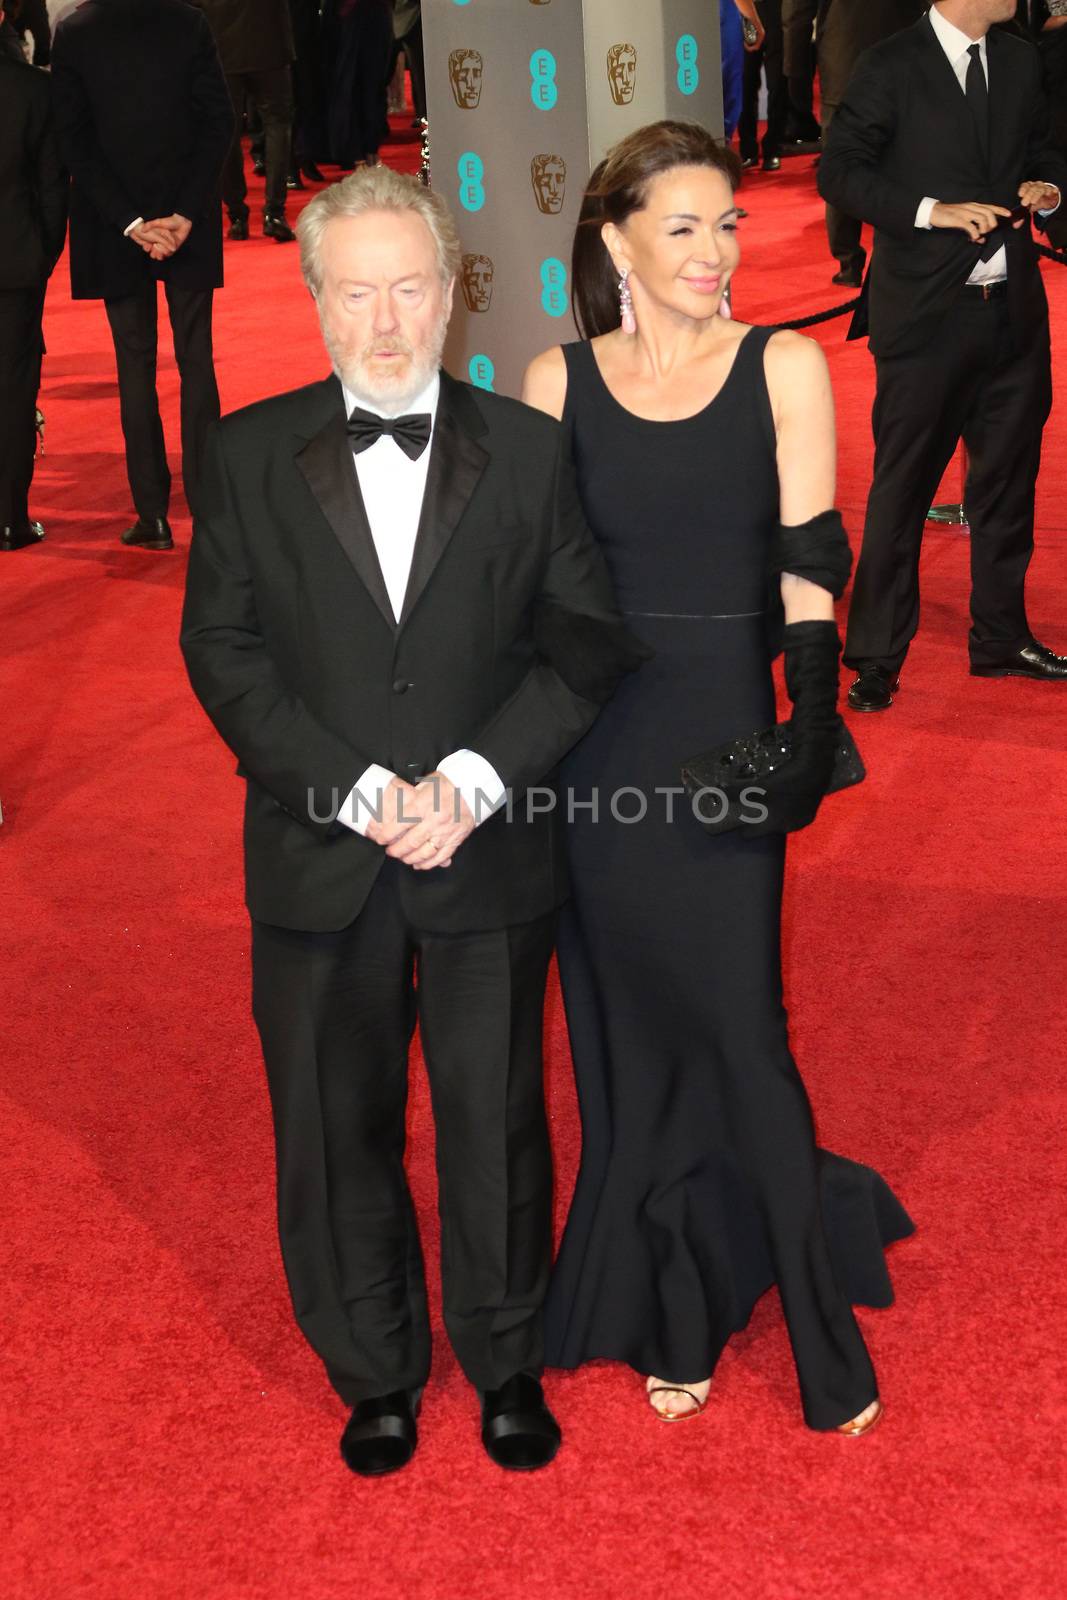 UK, London: British director Ridley Scott poses on the red Carpet at the EE British Academy Film Awards, BAFTA Awards, at the Royal Opera House in London, England, on 14 February 2016.